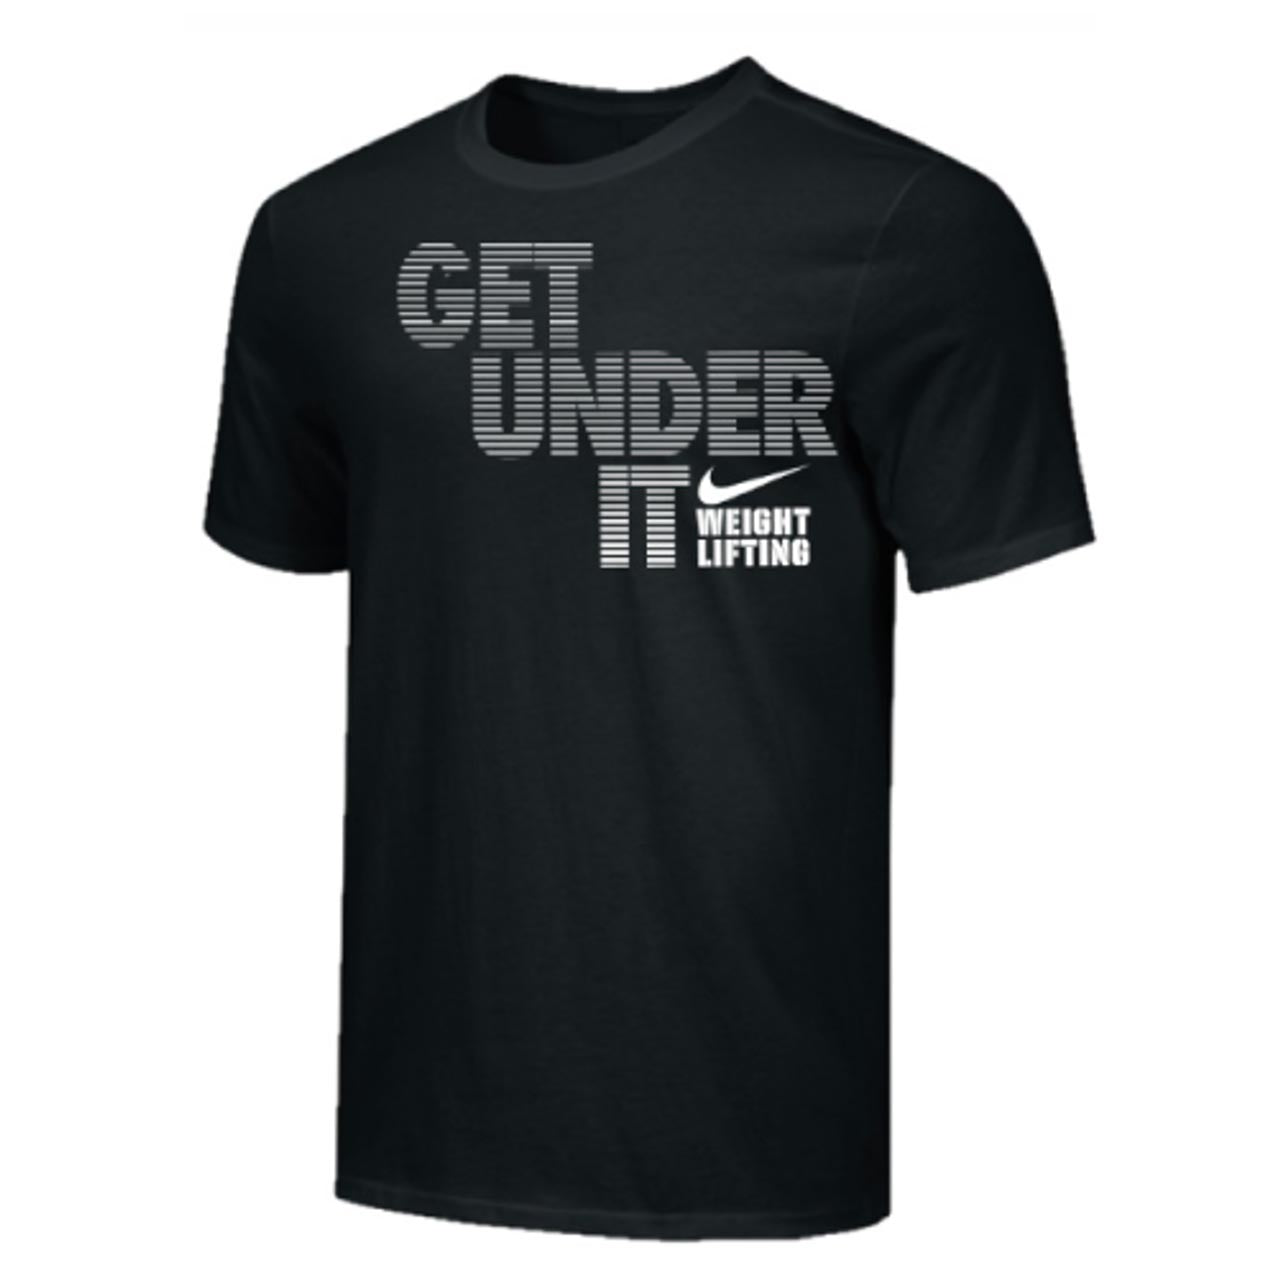 Nike Weightlifting Get Under It T-Shirt